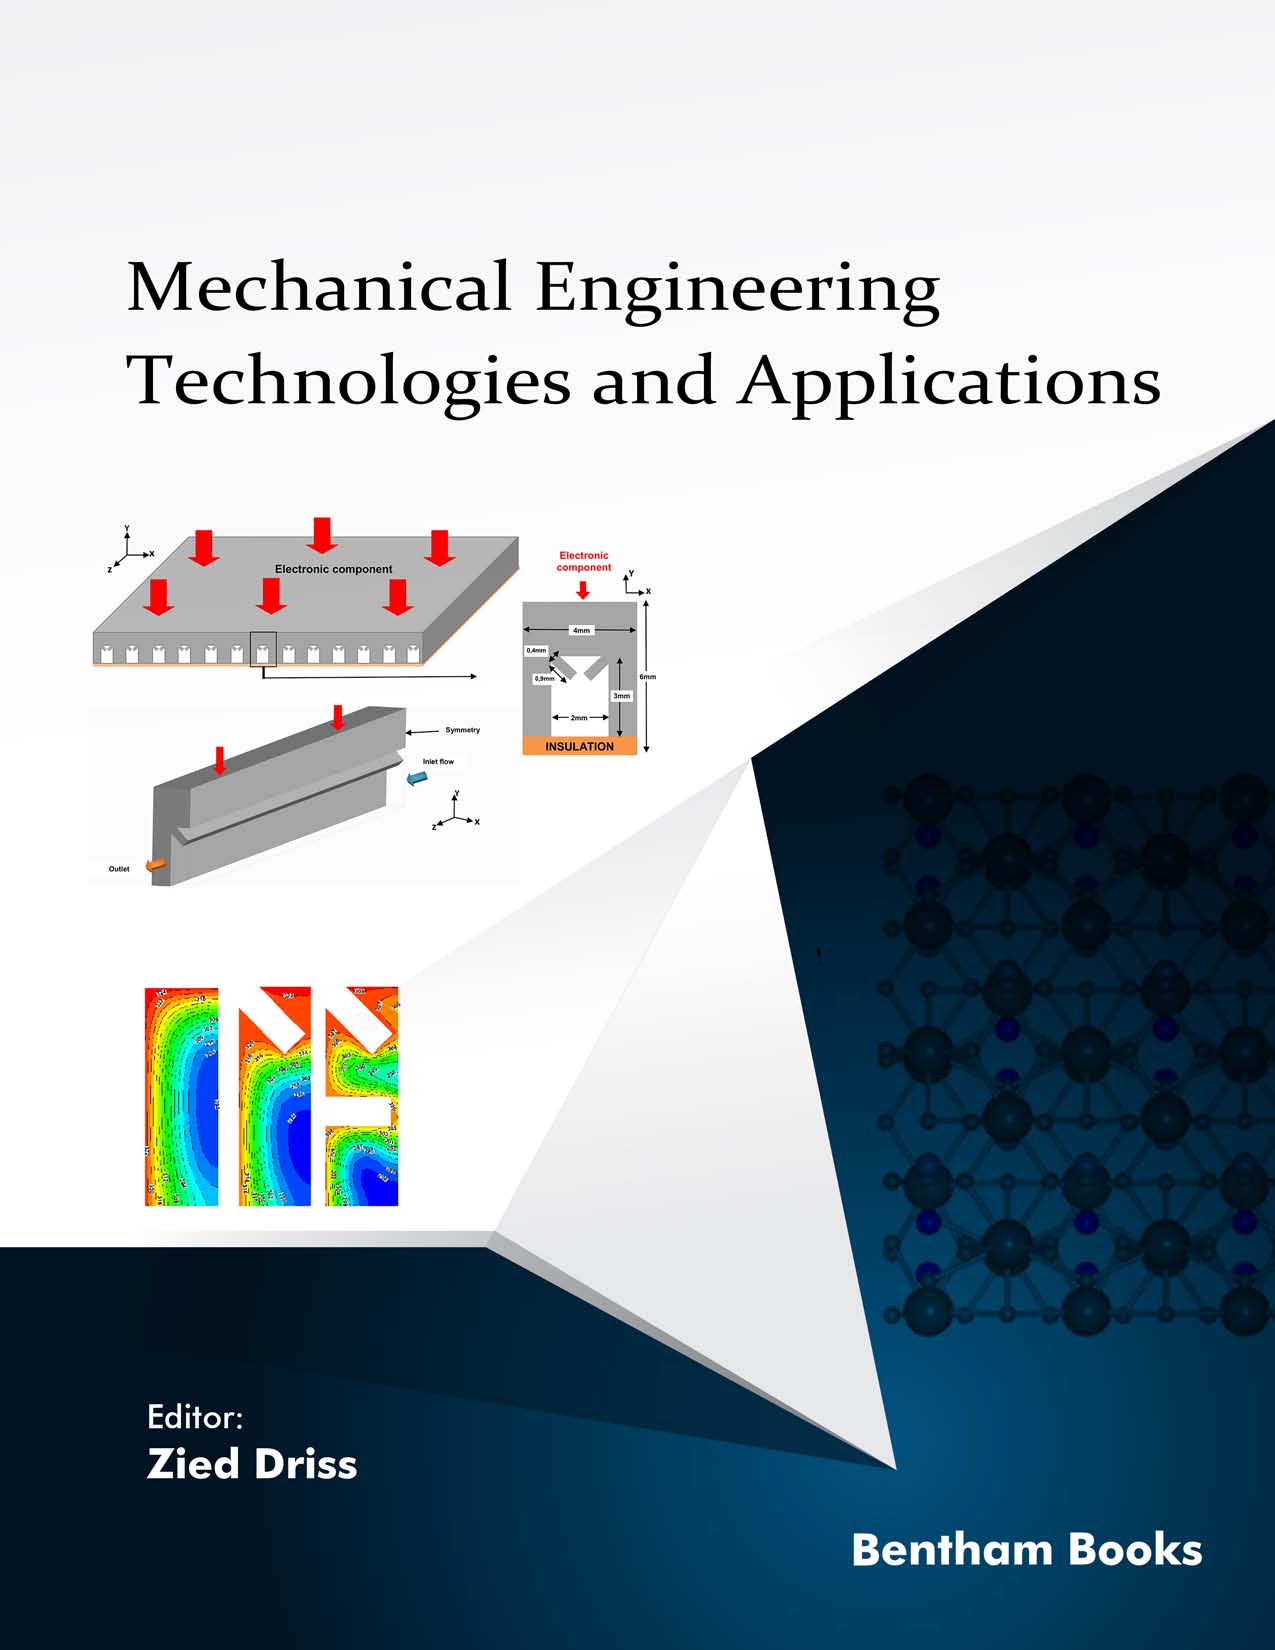 Mechanical Engineering Technologies and Applications Vol. 1